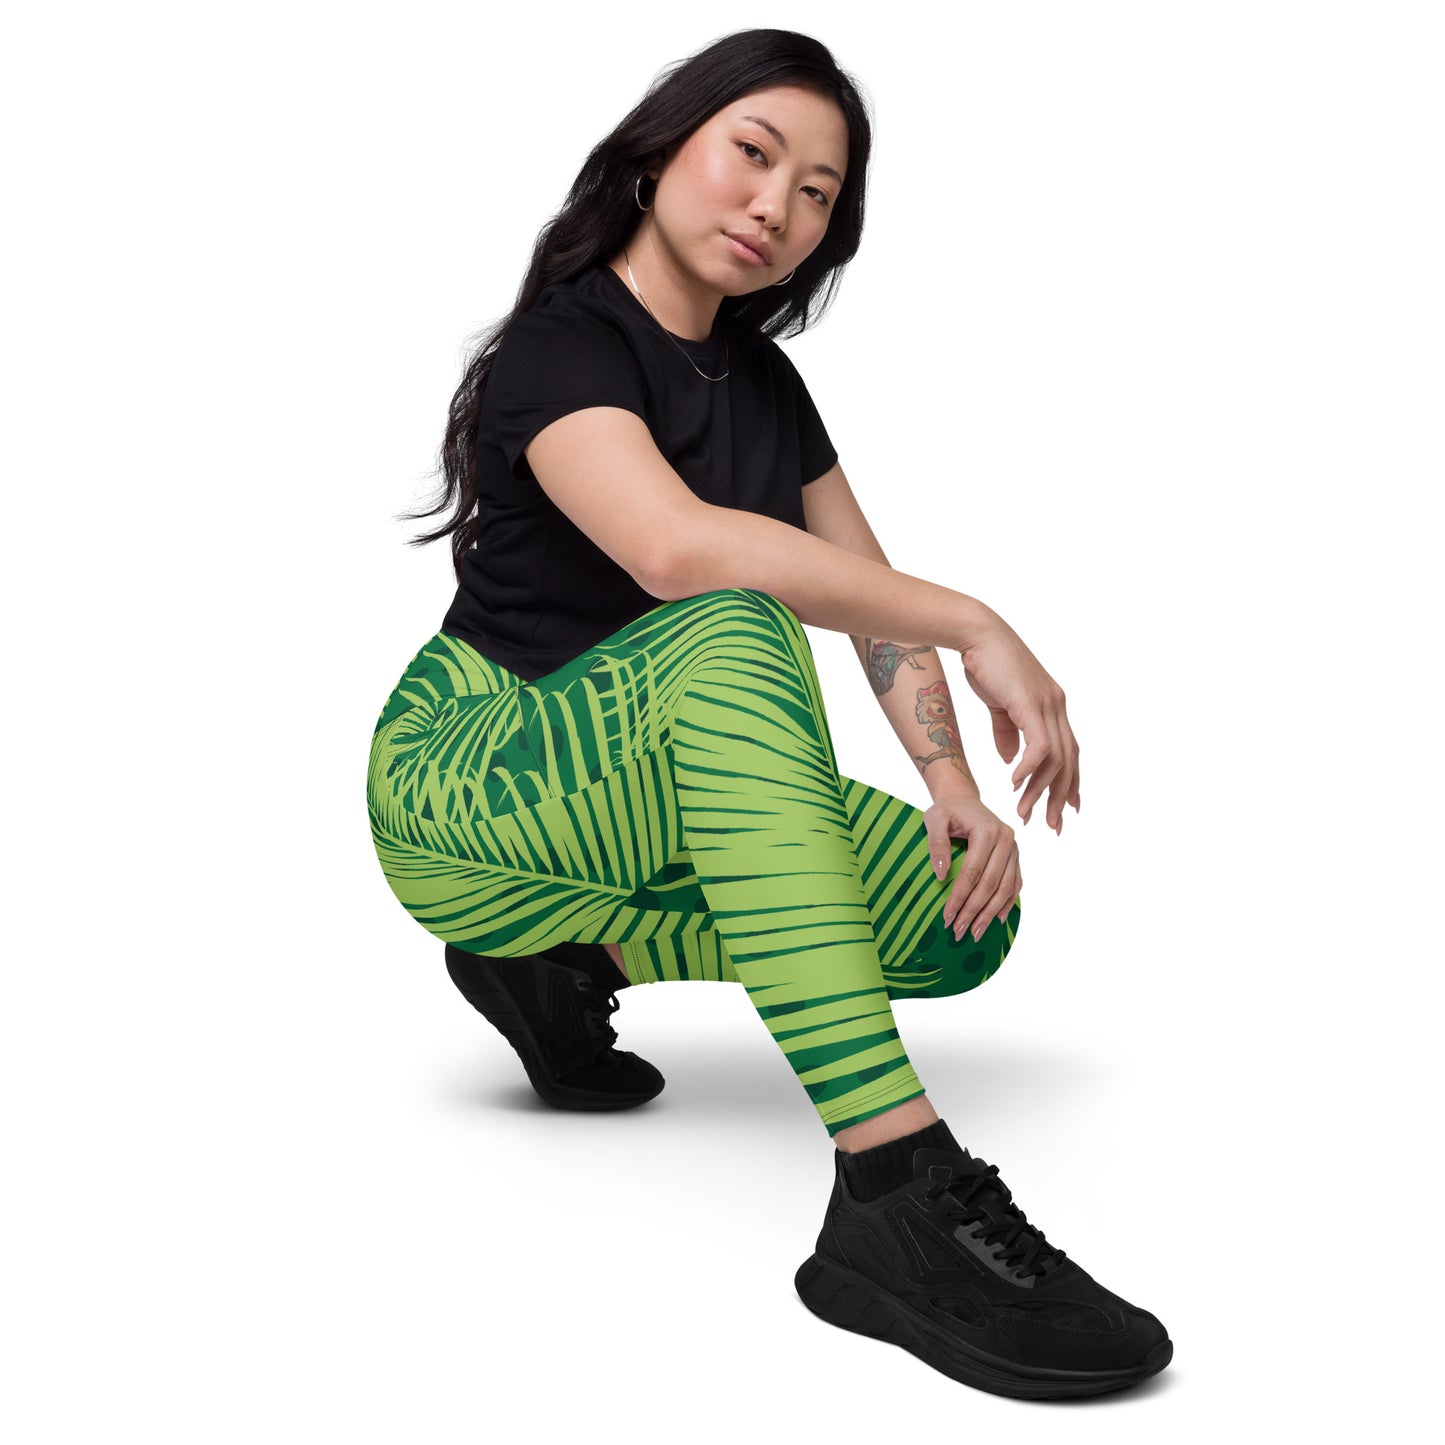 Green Leaves - Leggings with pockets, 2XS - 6XL Leggings With Pockets 2XS - 6XL (US)